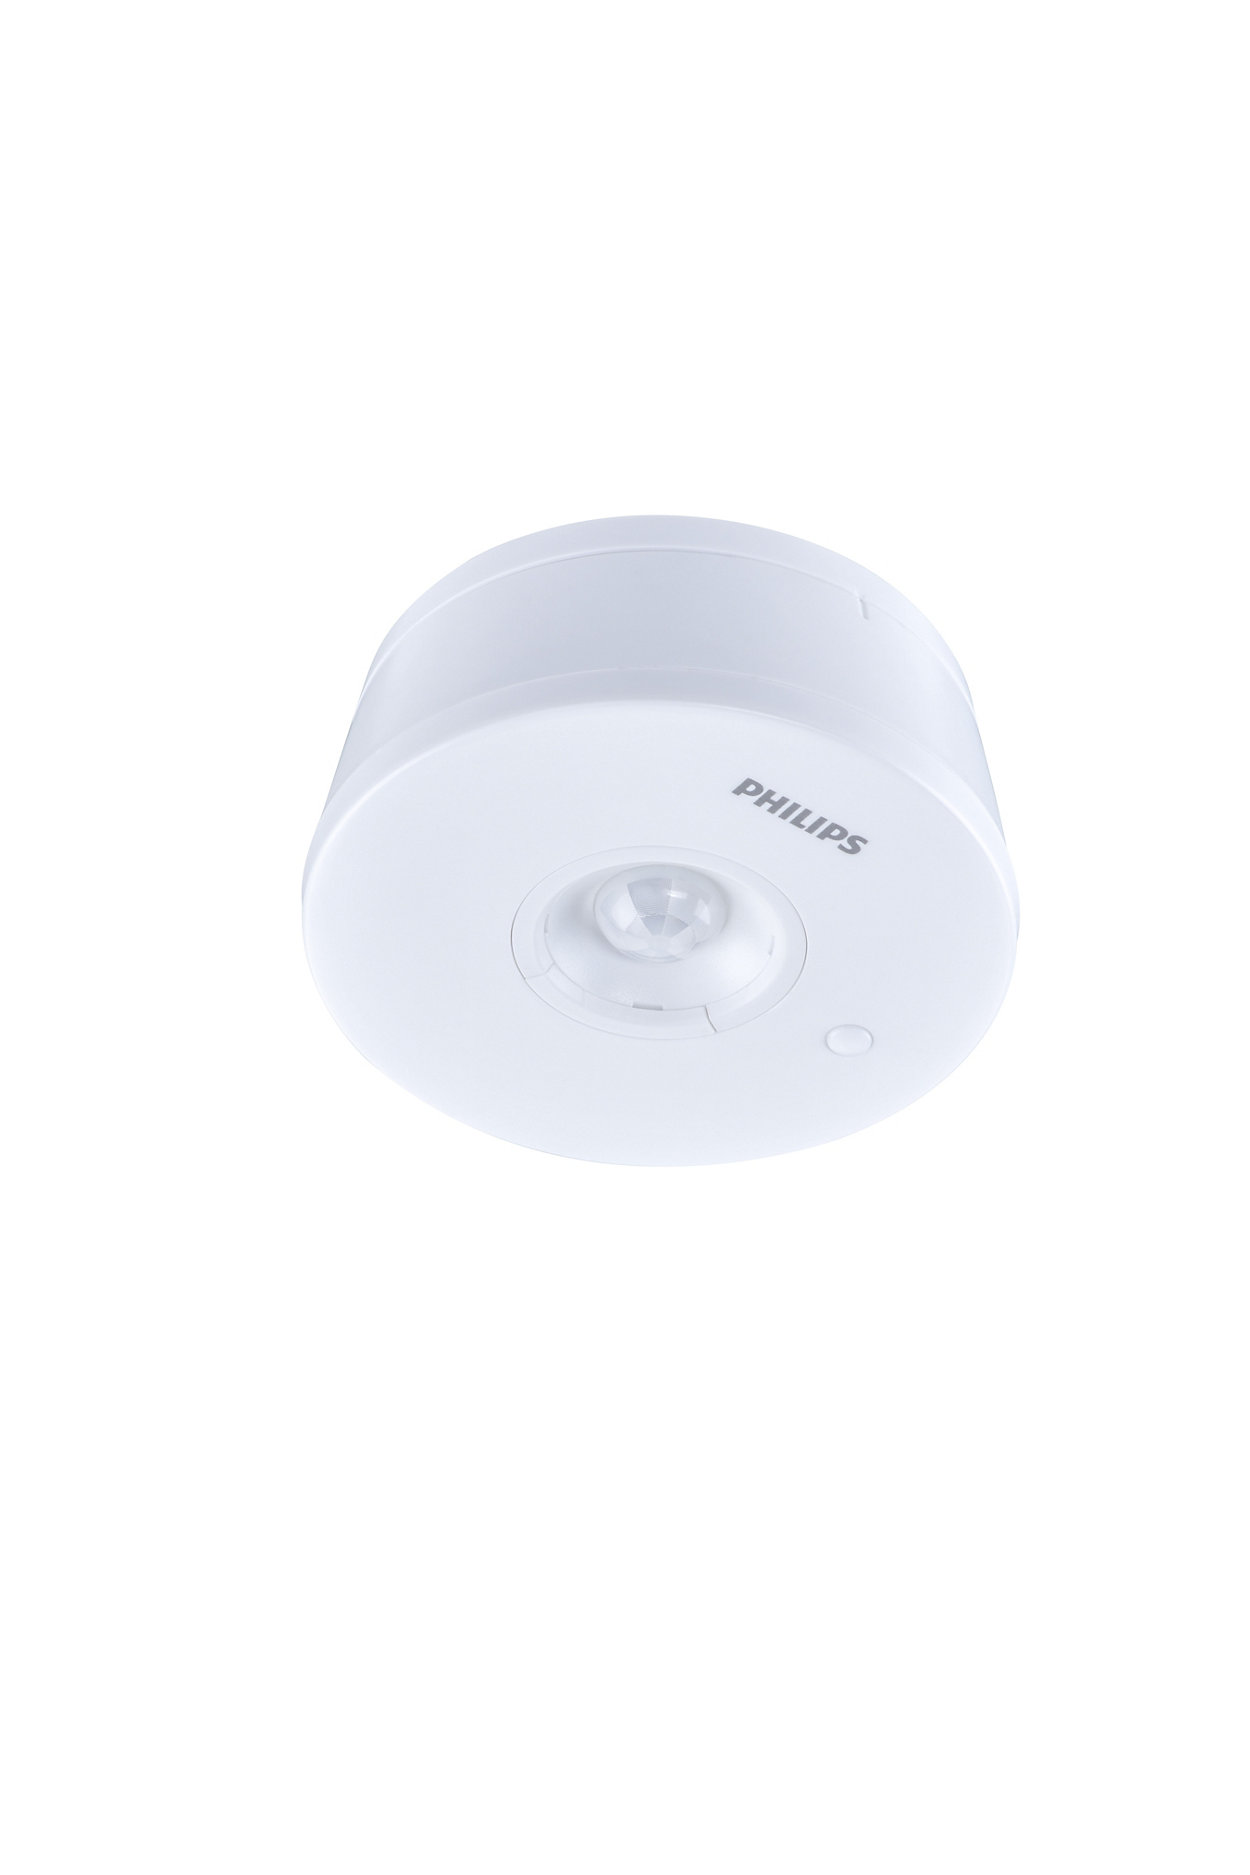 Philips EcoSet basic control system – save energy in a simple, reliable and affordable way 